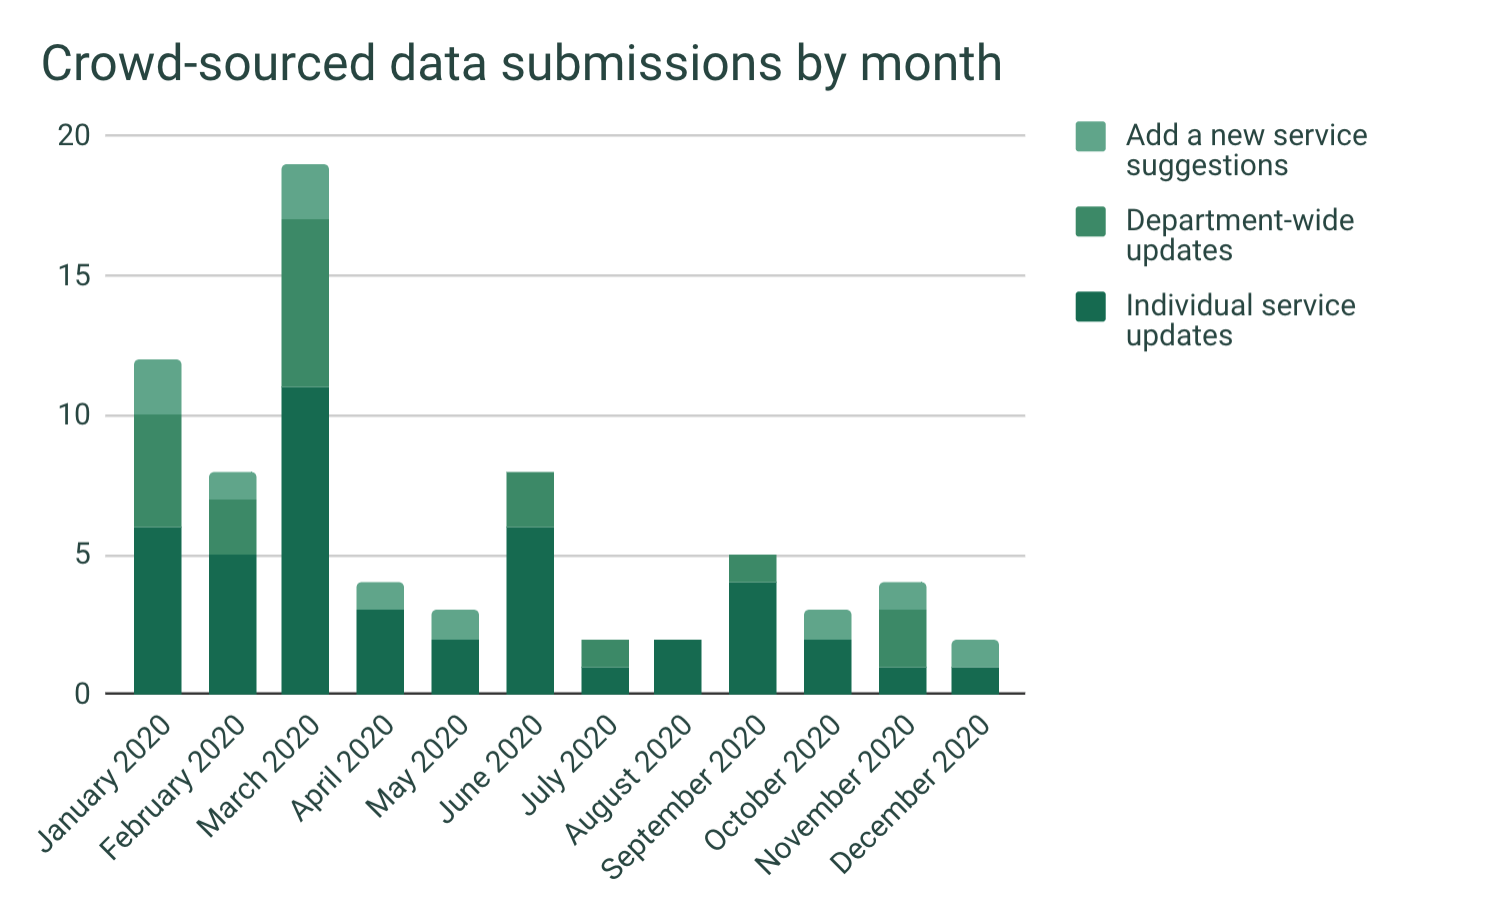 A stacked bar chart of crowd-sourced data submissions to “Is this blocked” by month, across three forms: “Add a new service suggestions”, “Department-wide updates”, and “Individual service updates”. The chart peaks in March 2020 just shy of 20 submissions that month; the other months are almost all below 5 entries per month, except for January, February, and June.